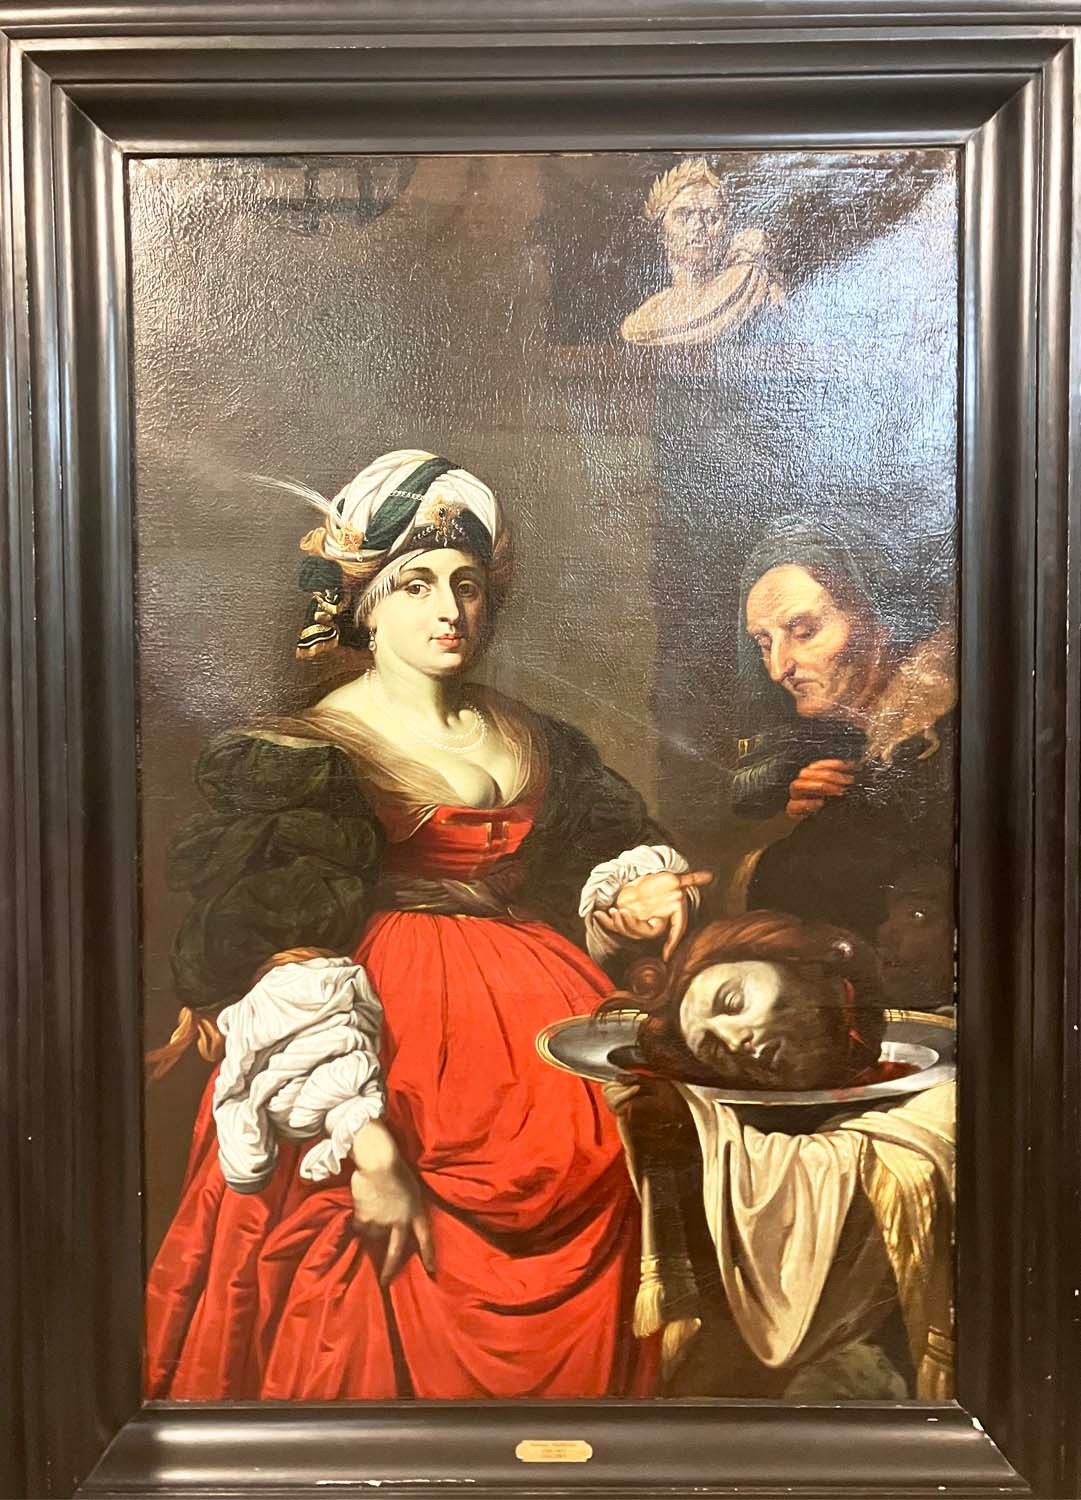 MANNER OF GERARD SEGHERS, 'Judith and Holofernes', oil on canvas, 164cm x 108cm, framed.